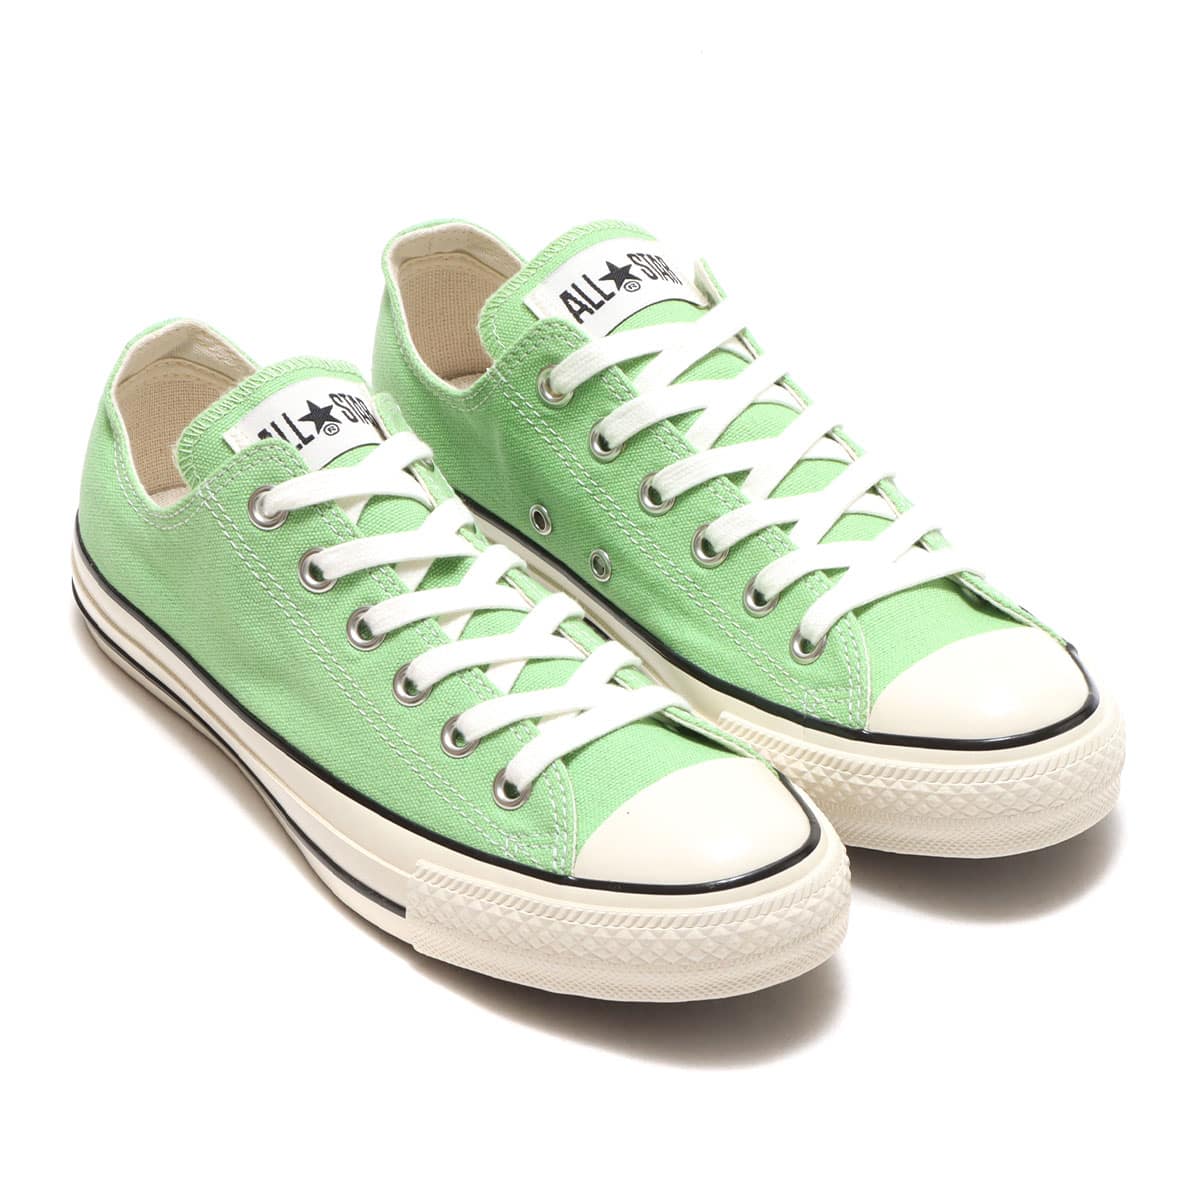 CONVERSE ALL STAR US COLORS OX GREEN 22FW-I_photo_large